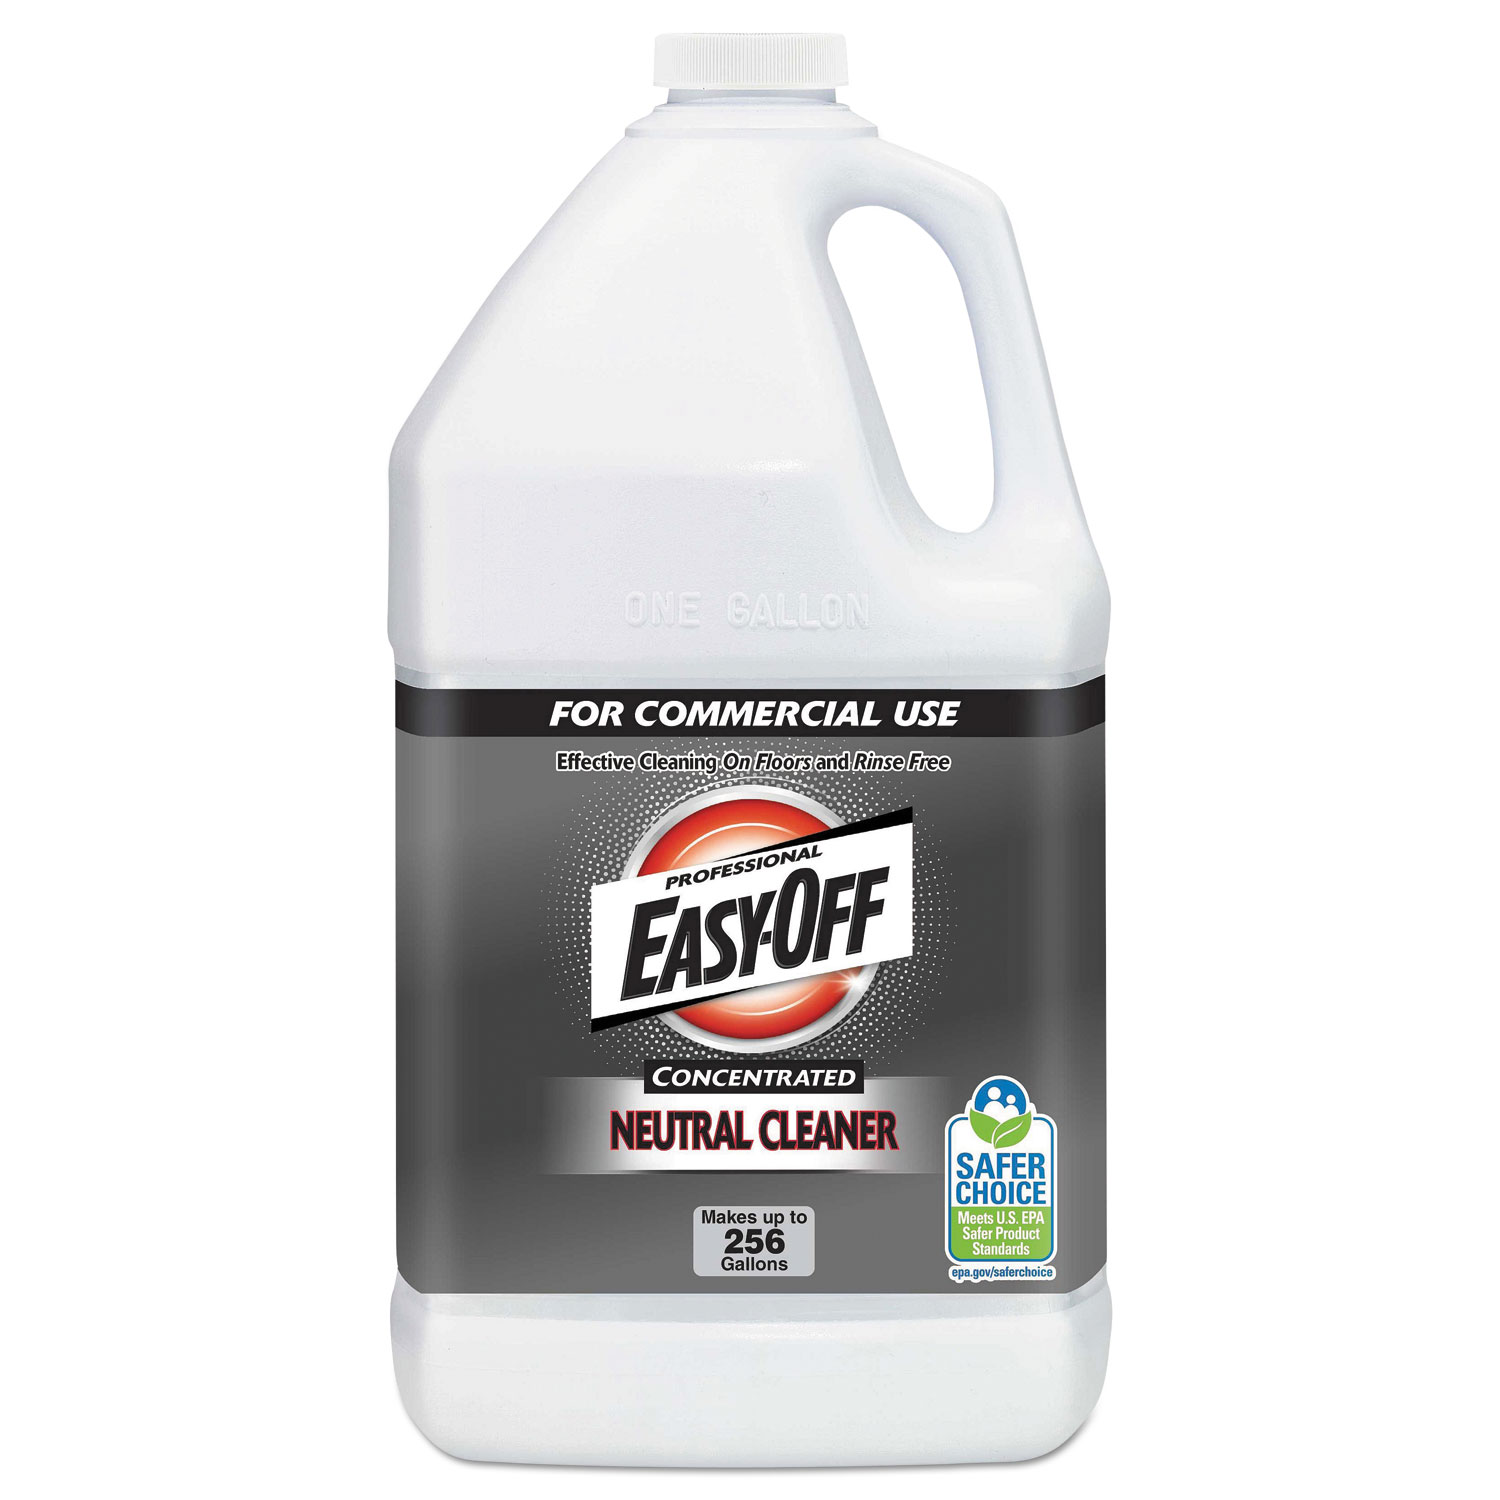  Professional EASY-OFF 36241-89770 Concentrated Neutral Cleaner, 1 gal bottle 2/Carton (RAC89770CT) 